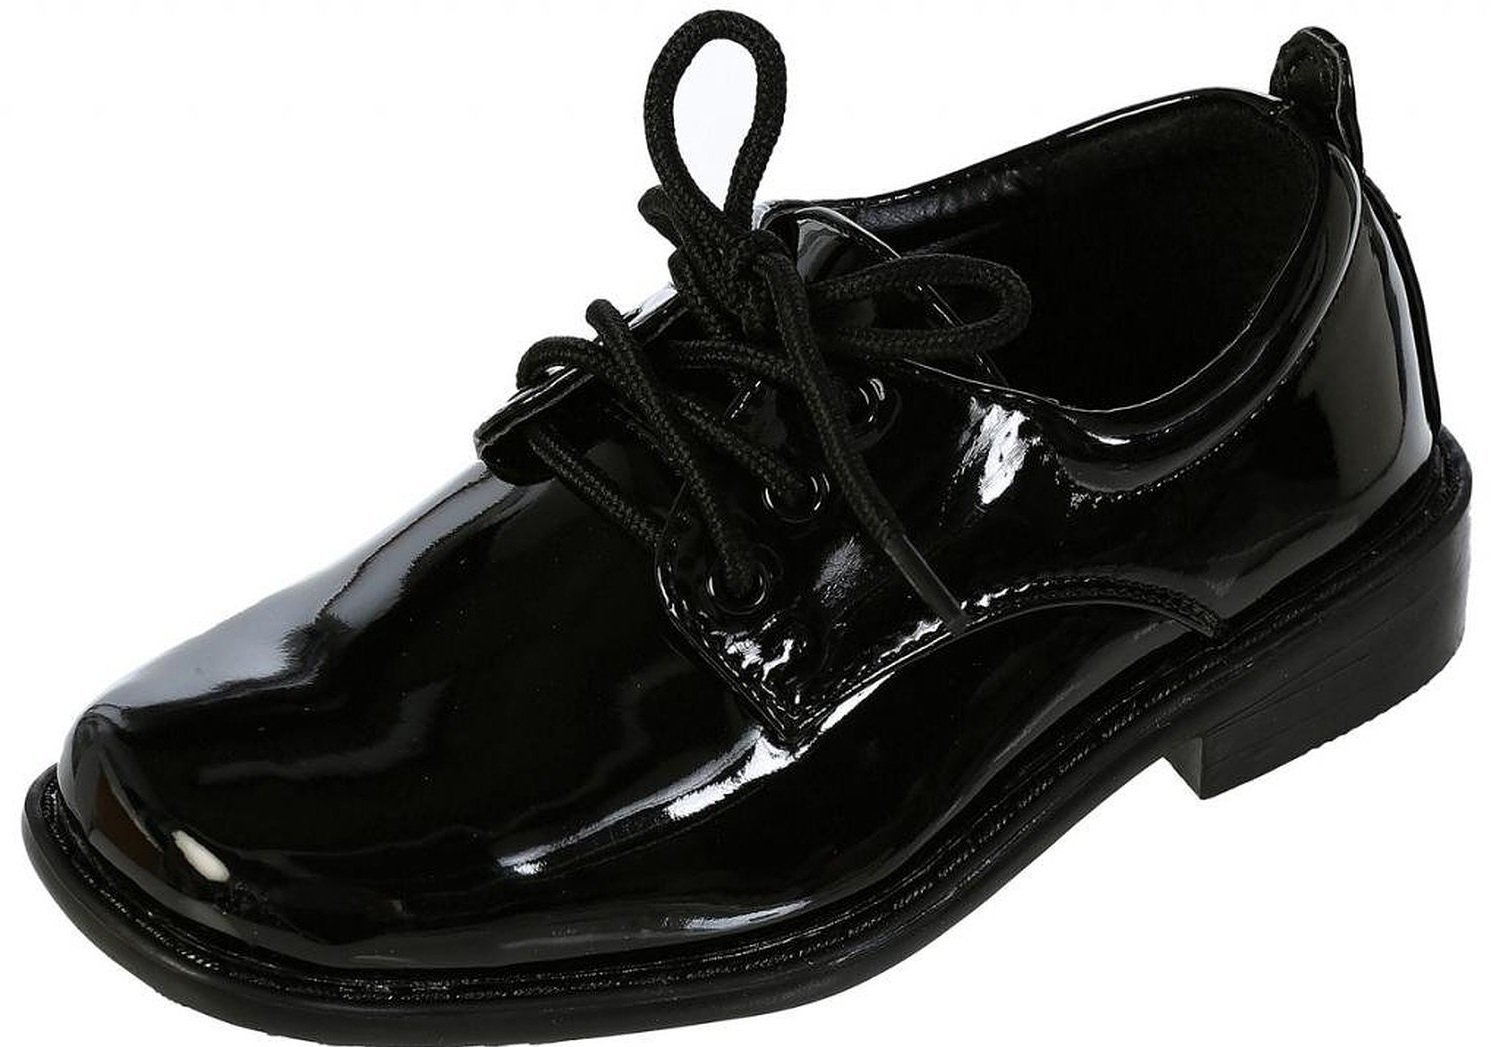 Boys Square Toe Lace Up Oxford Patent Dress Shoes - Available in Black 11 Little Kid